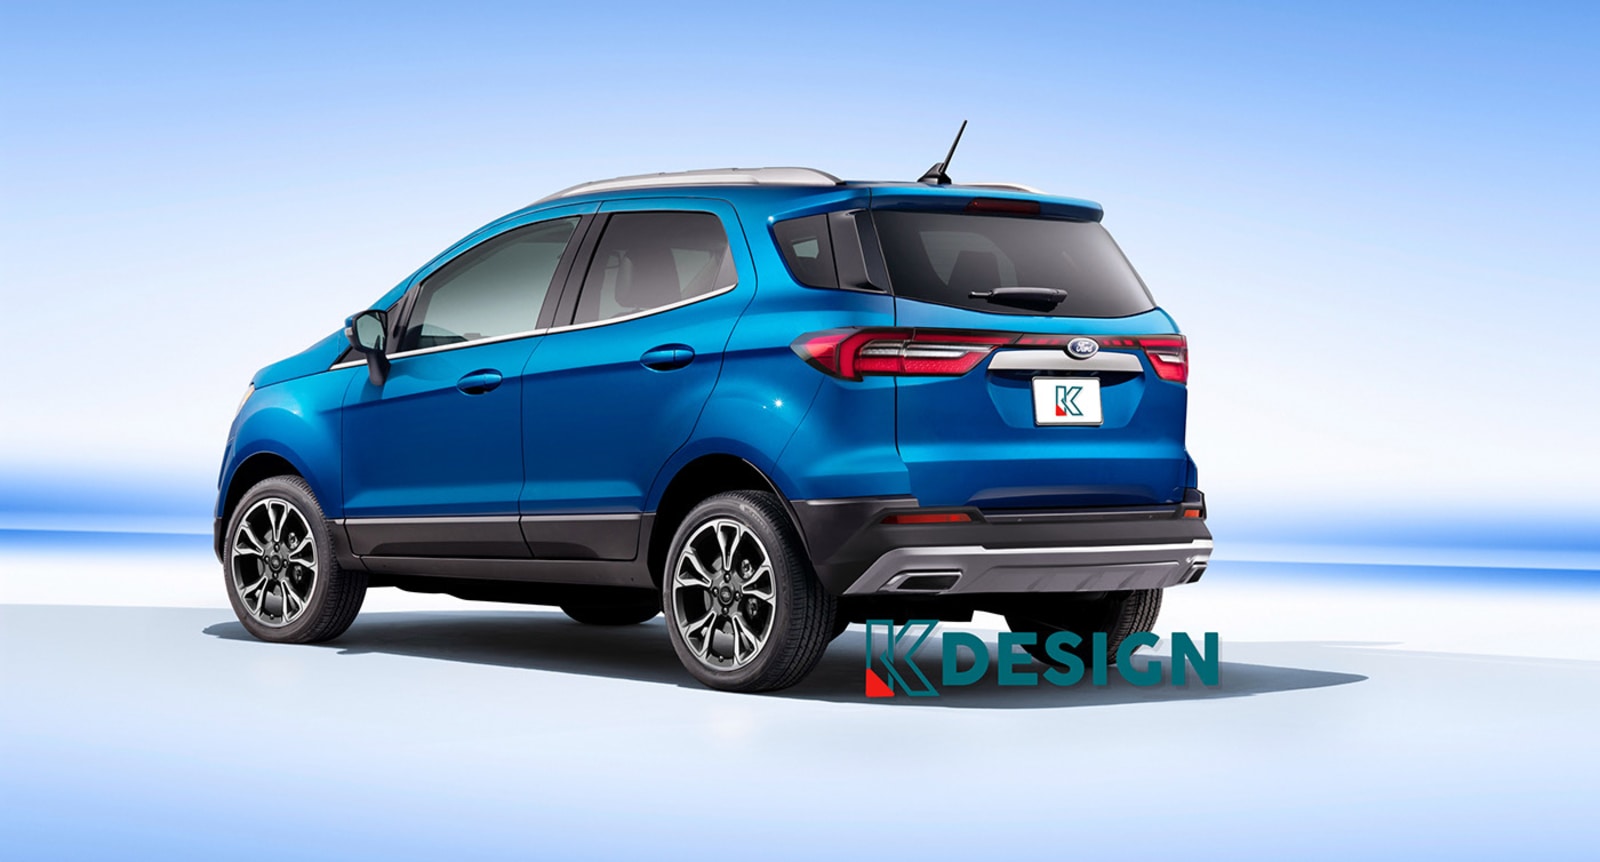 NextGeneration Ford Ecosport Imagined In A Speculative Rendering